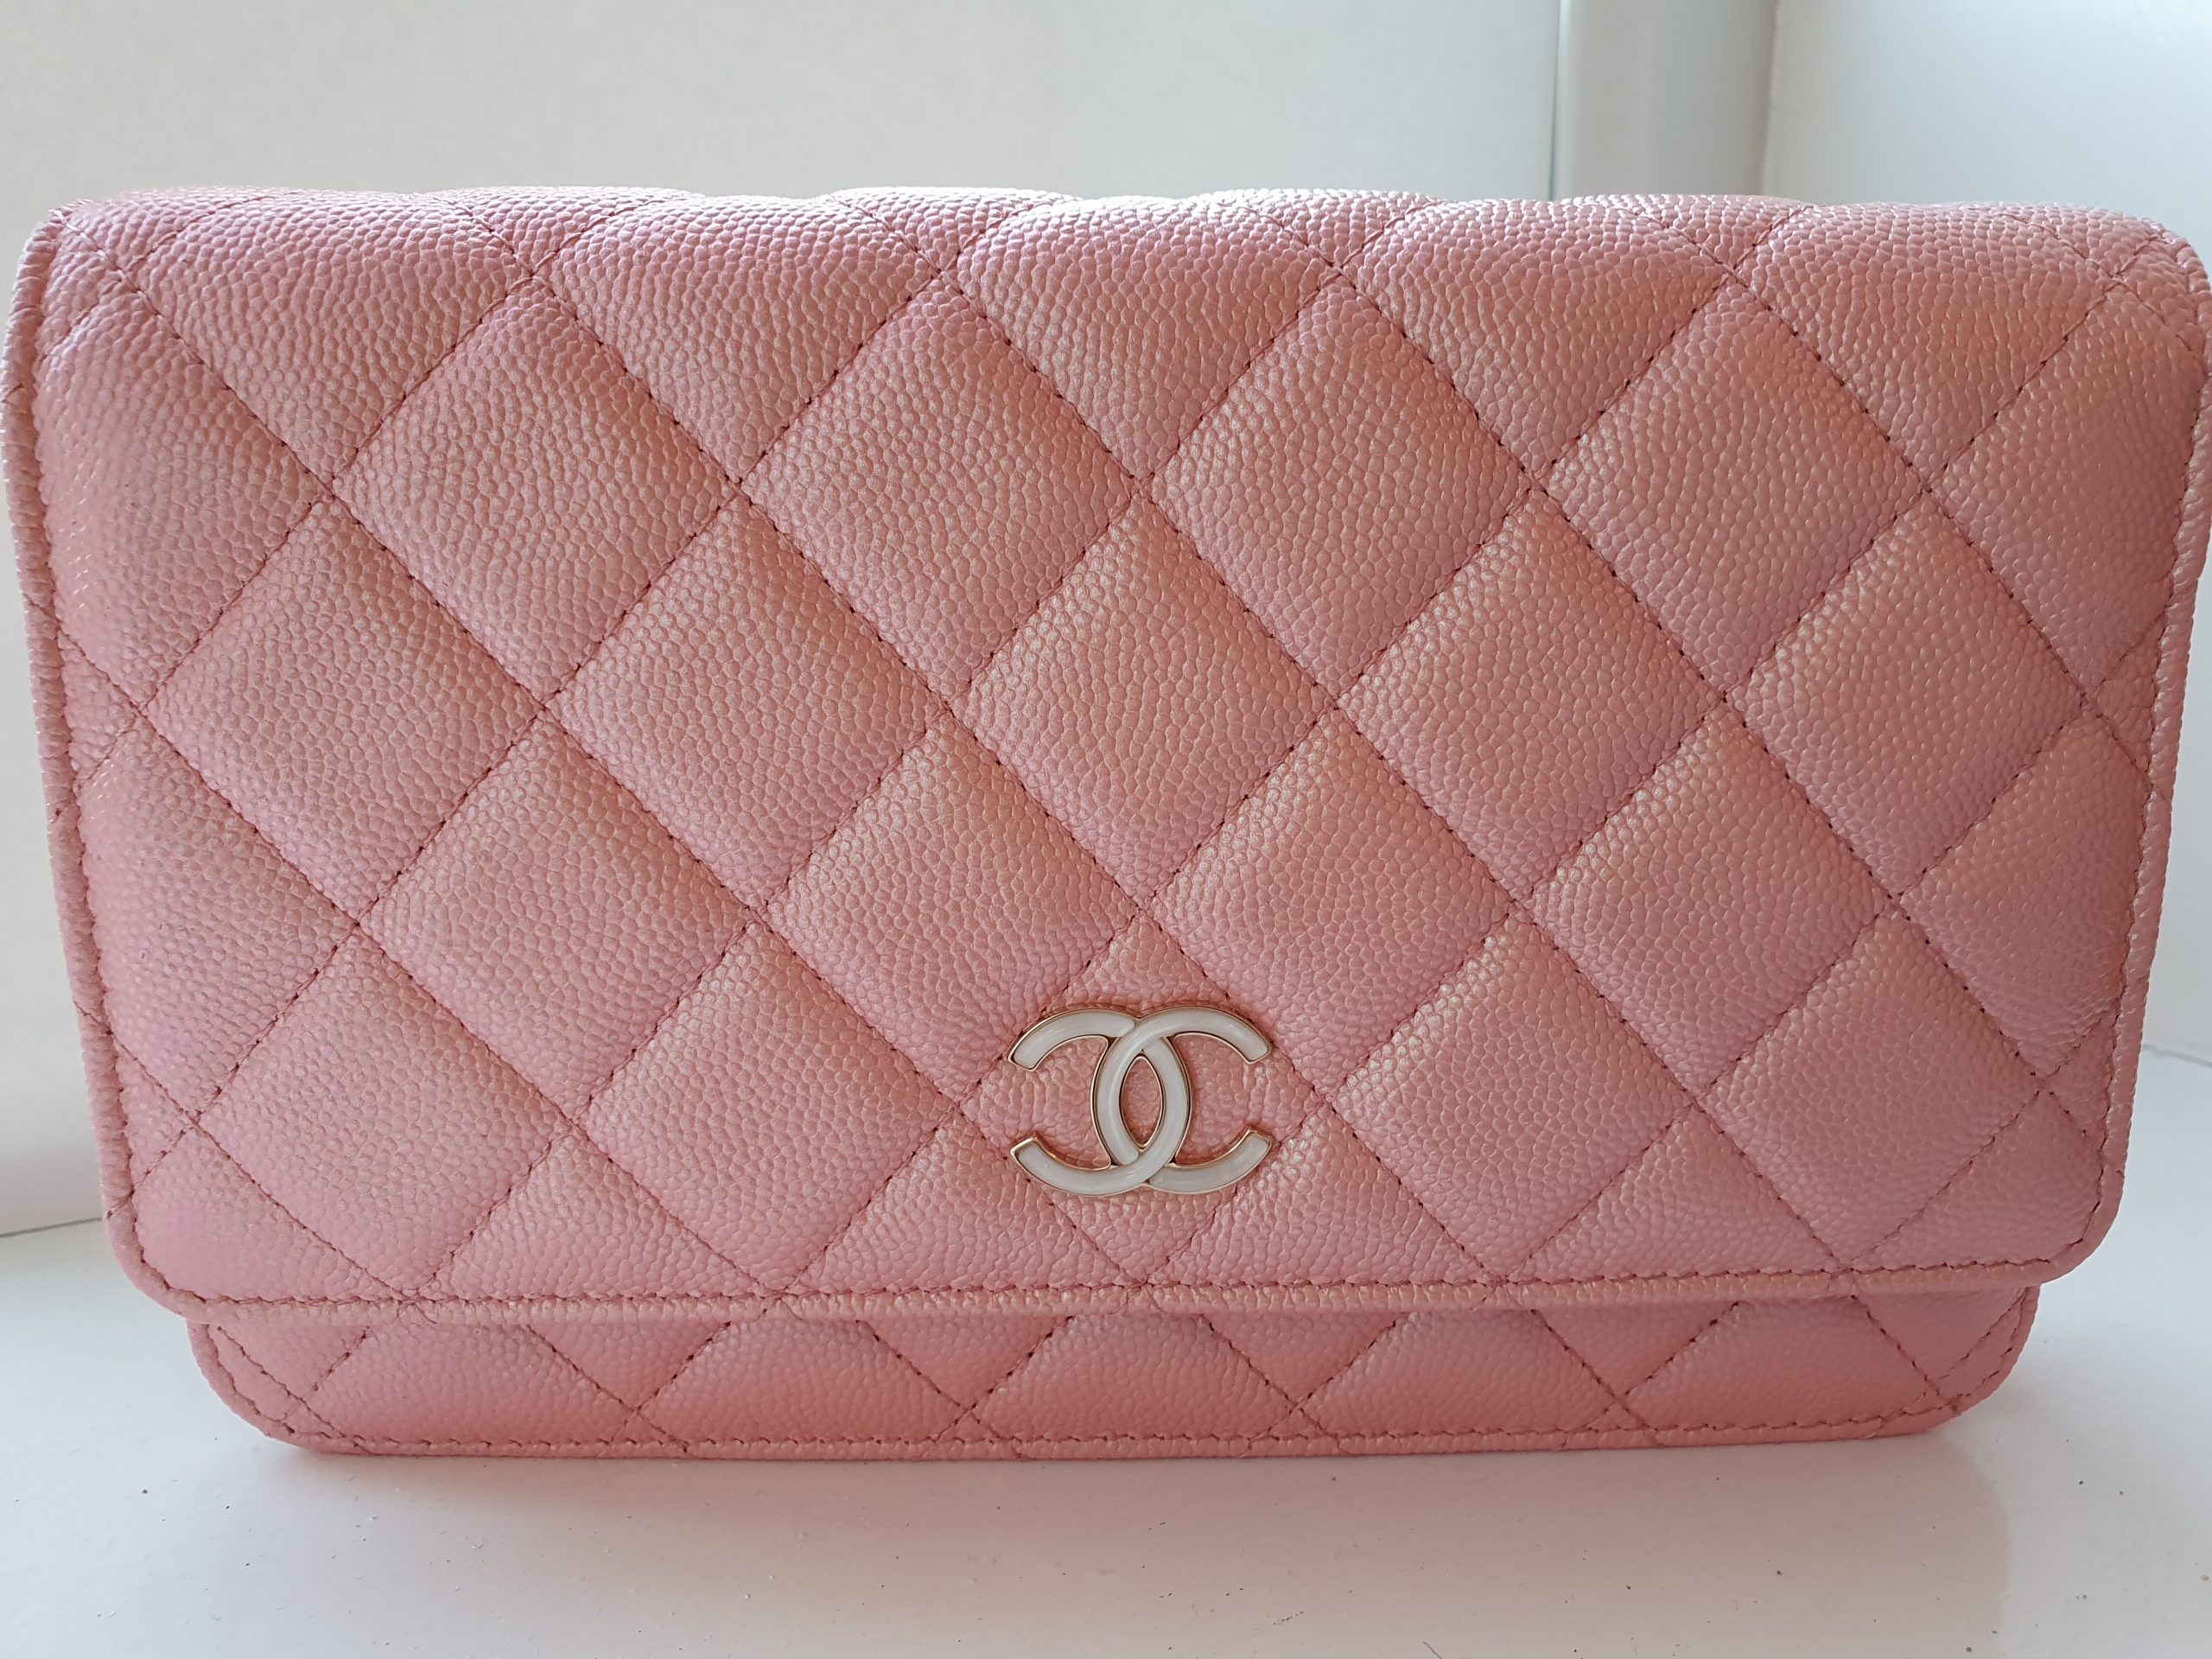 Chanel 19S Iridescent Pink Wallet on Chain Bag - Seeking Perfect